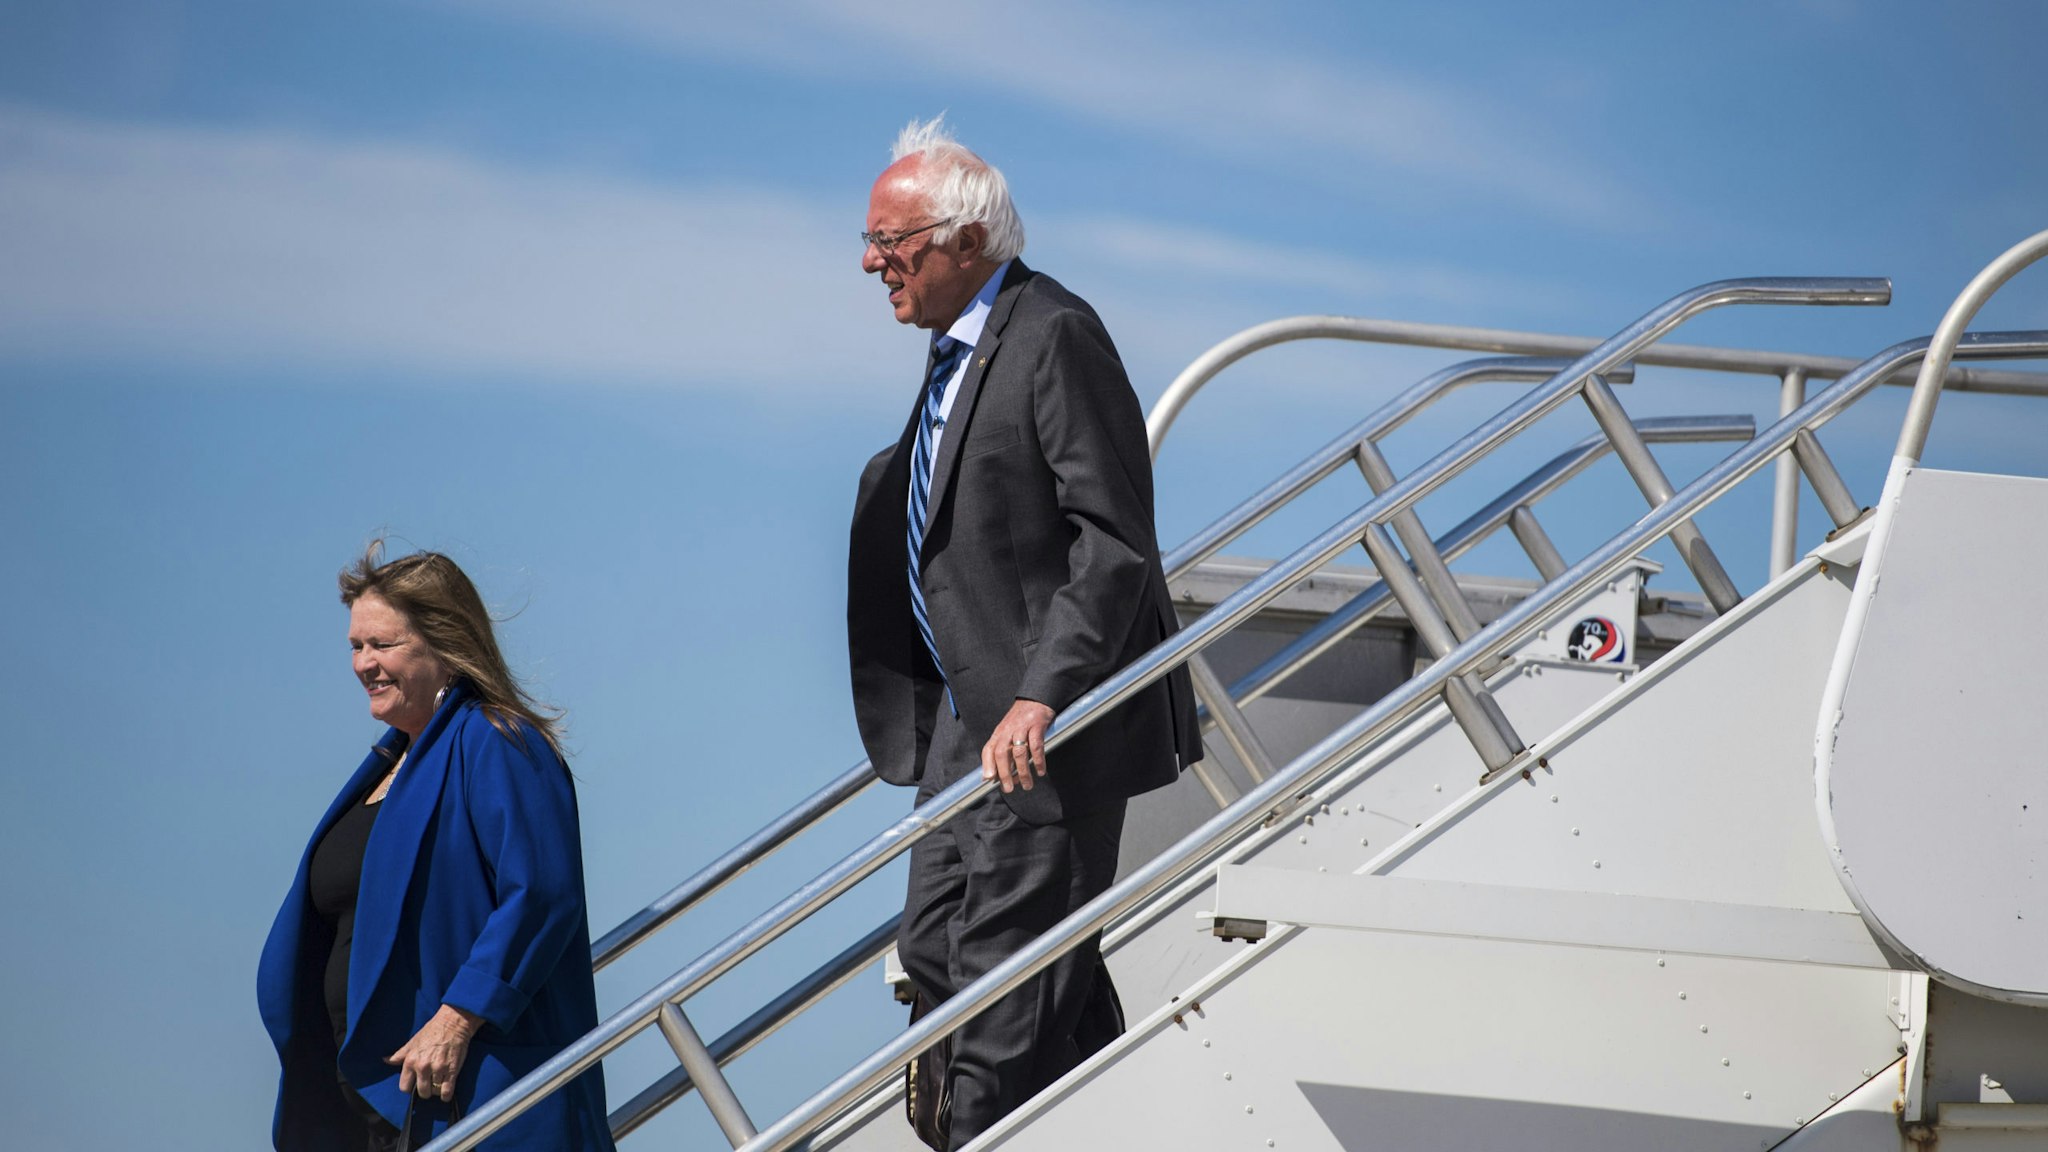 DULLES, VA - JUNE 9: Democratic presidential candidate Sen. Bernie Sanders, I-Vt., and and his wife Jane Sanders disembark a plane as he heads to meet with President Barack Obama at the White House in Dulles, VA on Thursday June 09, 2016. (Photo by Jabin Botsford/The Washington Post via Getty Images)